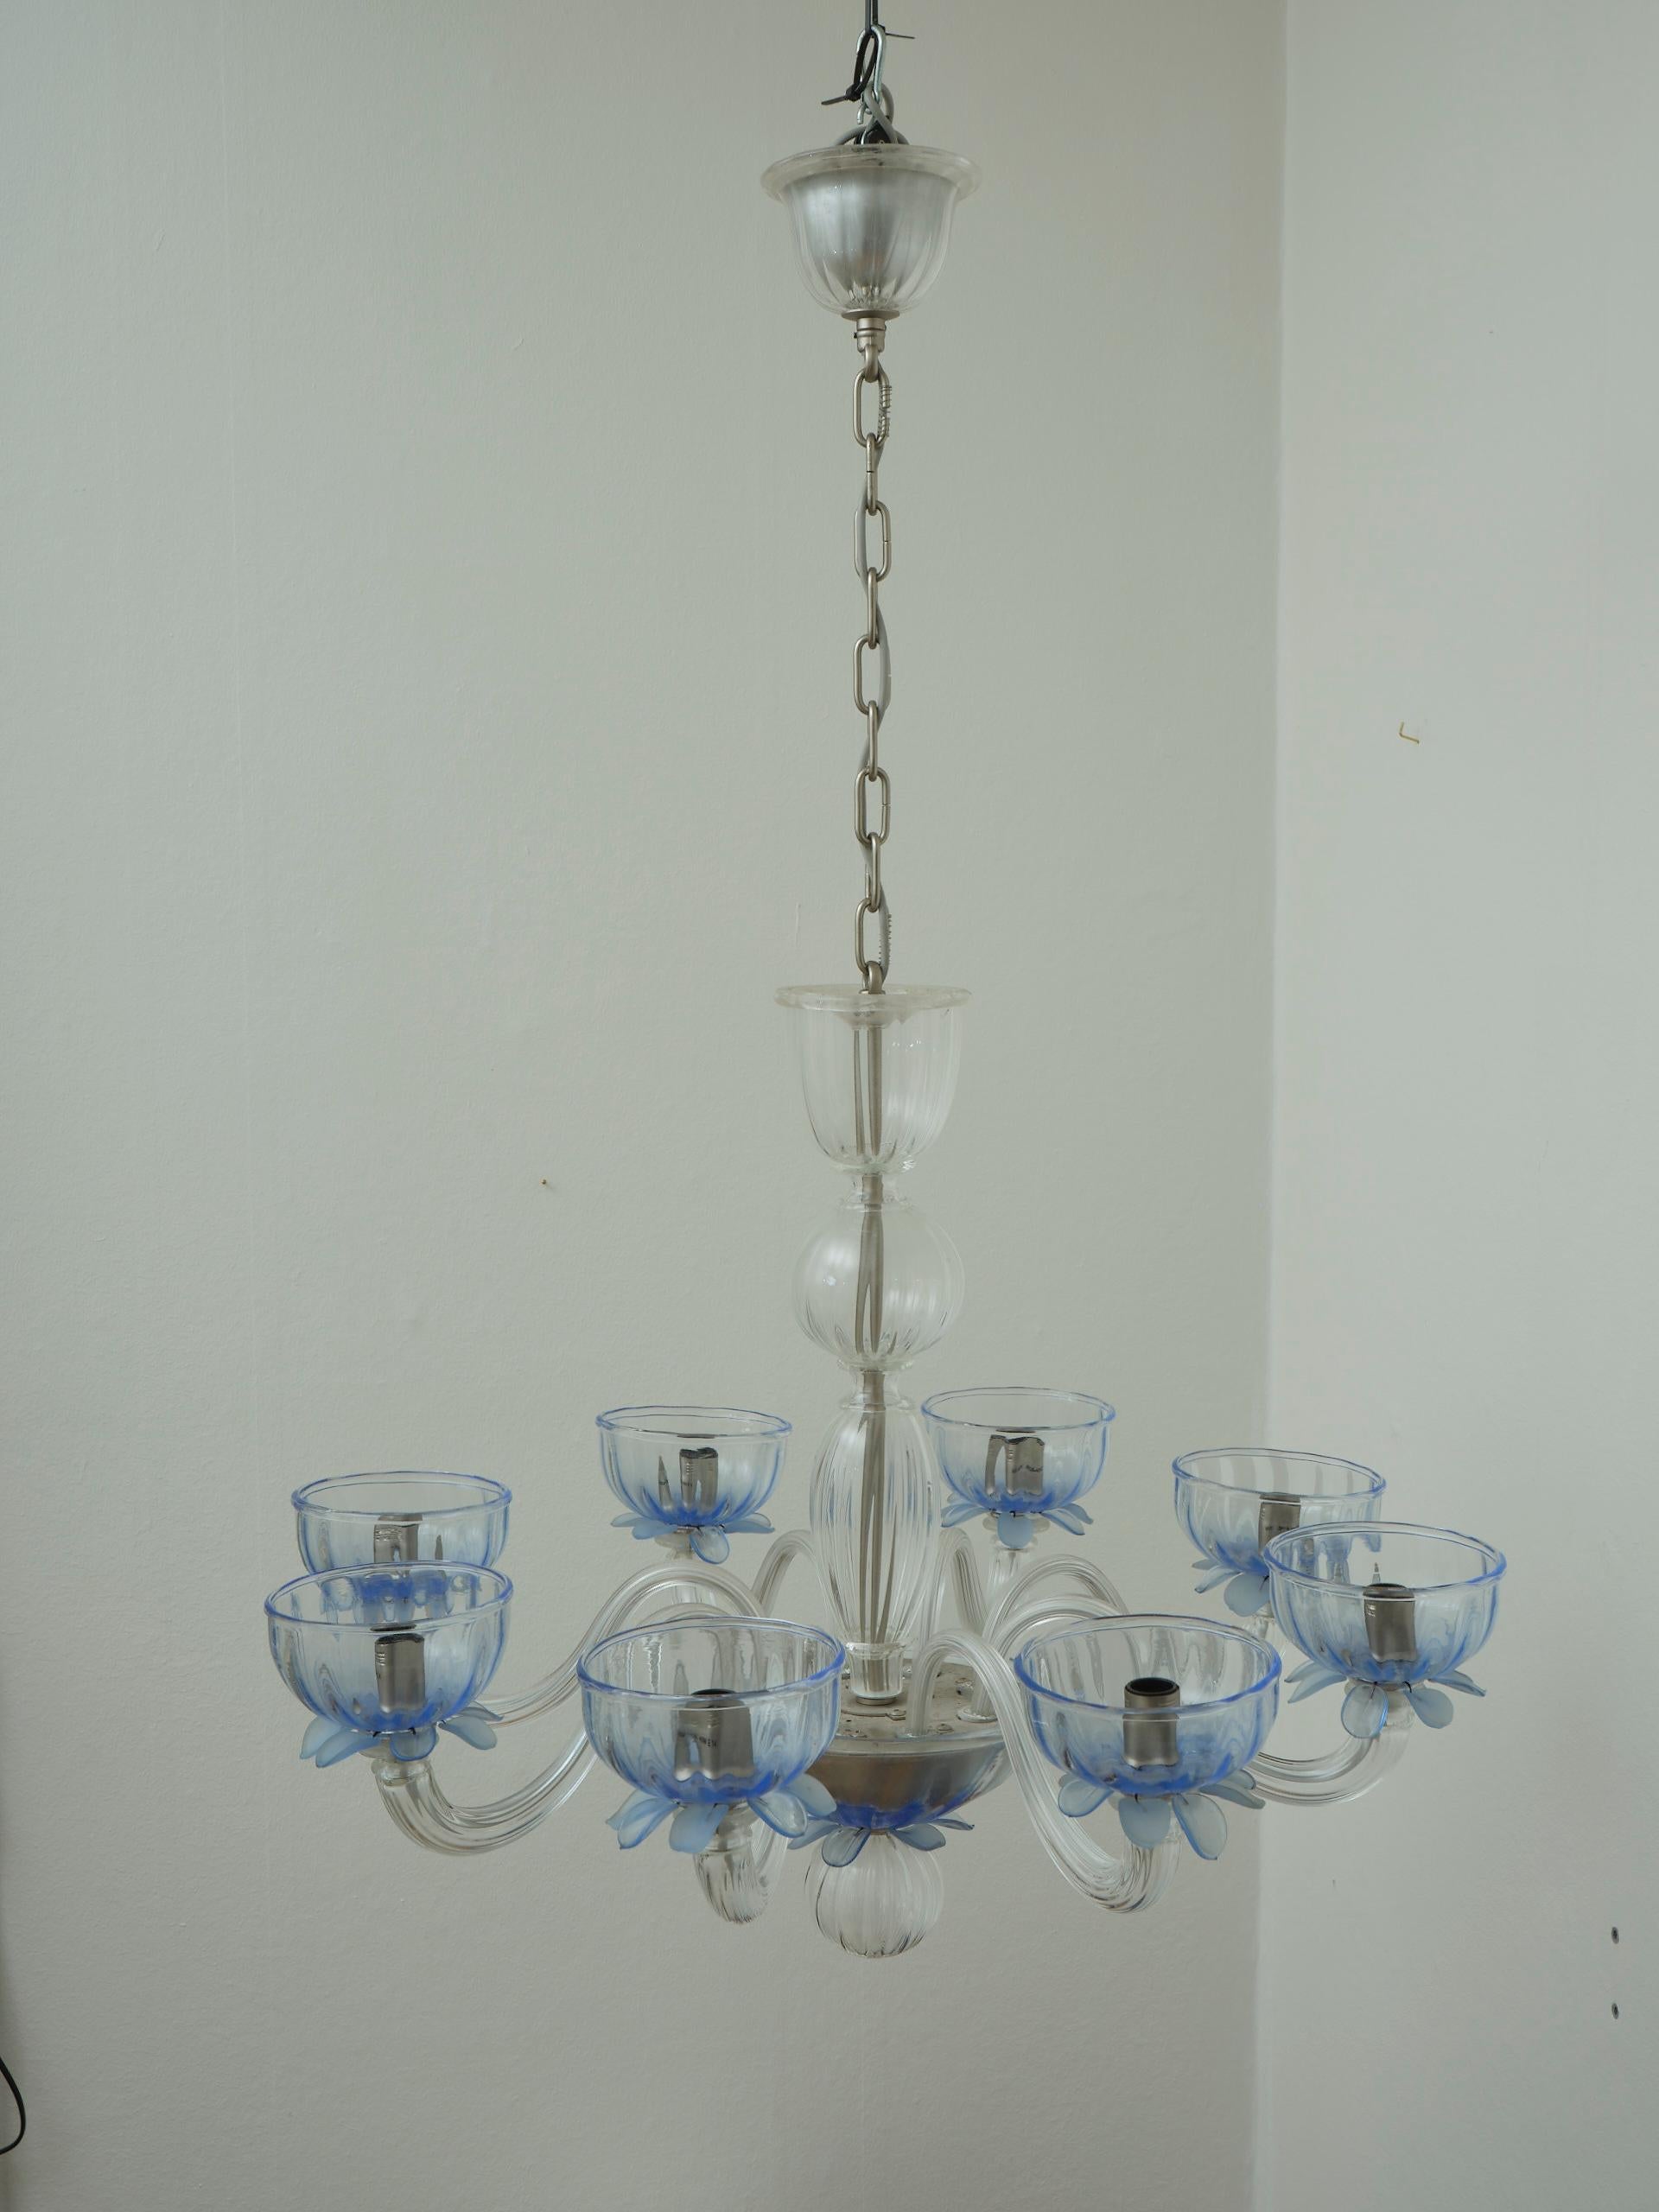 Giant European glass chandelier 8 arms blue details in the style of Murano In Good Condition For Sale In Frederiksberg C, DK